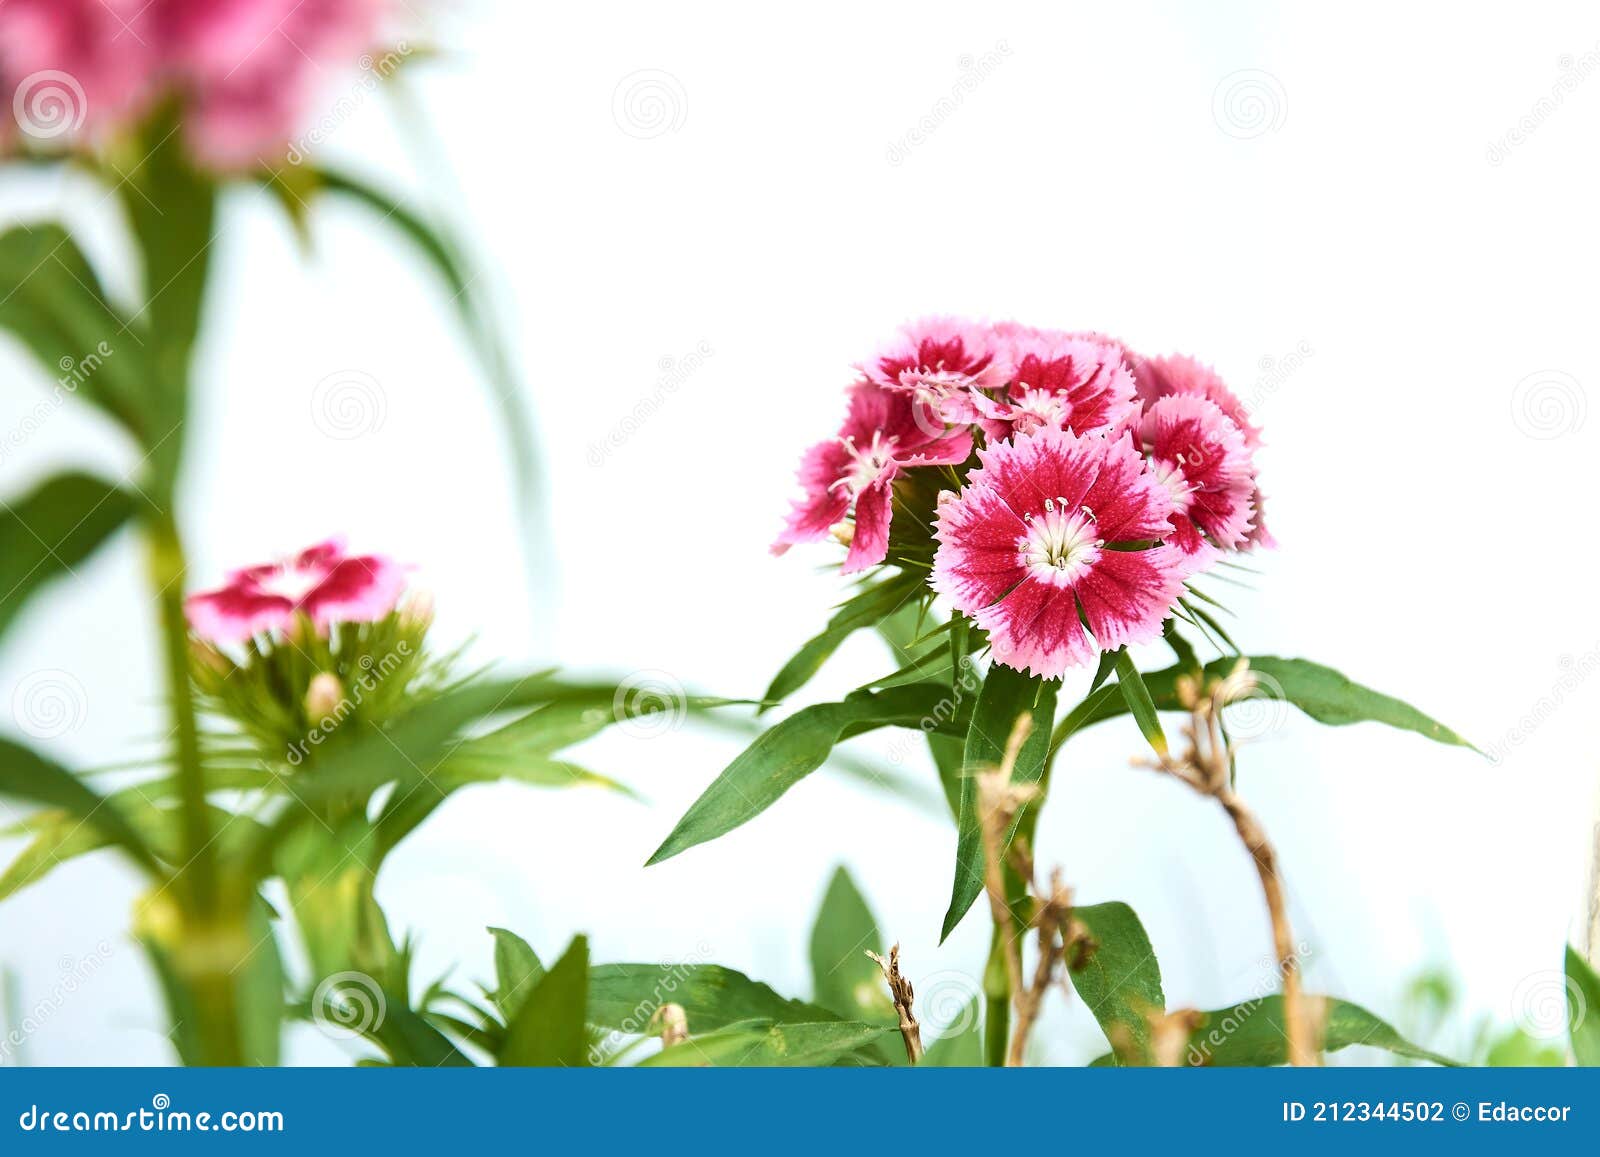 red sweet william dianthus barbatus flowers  on white background